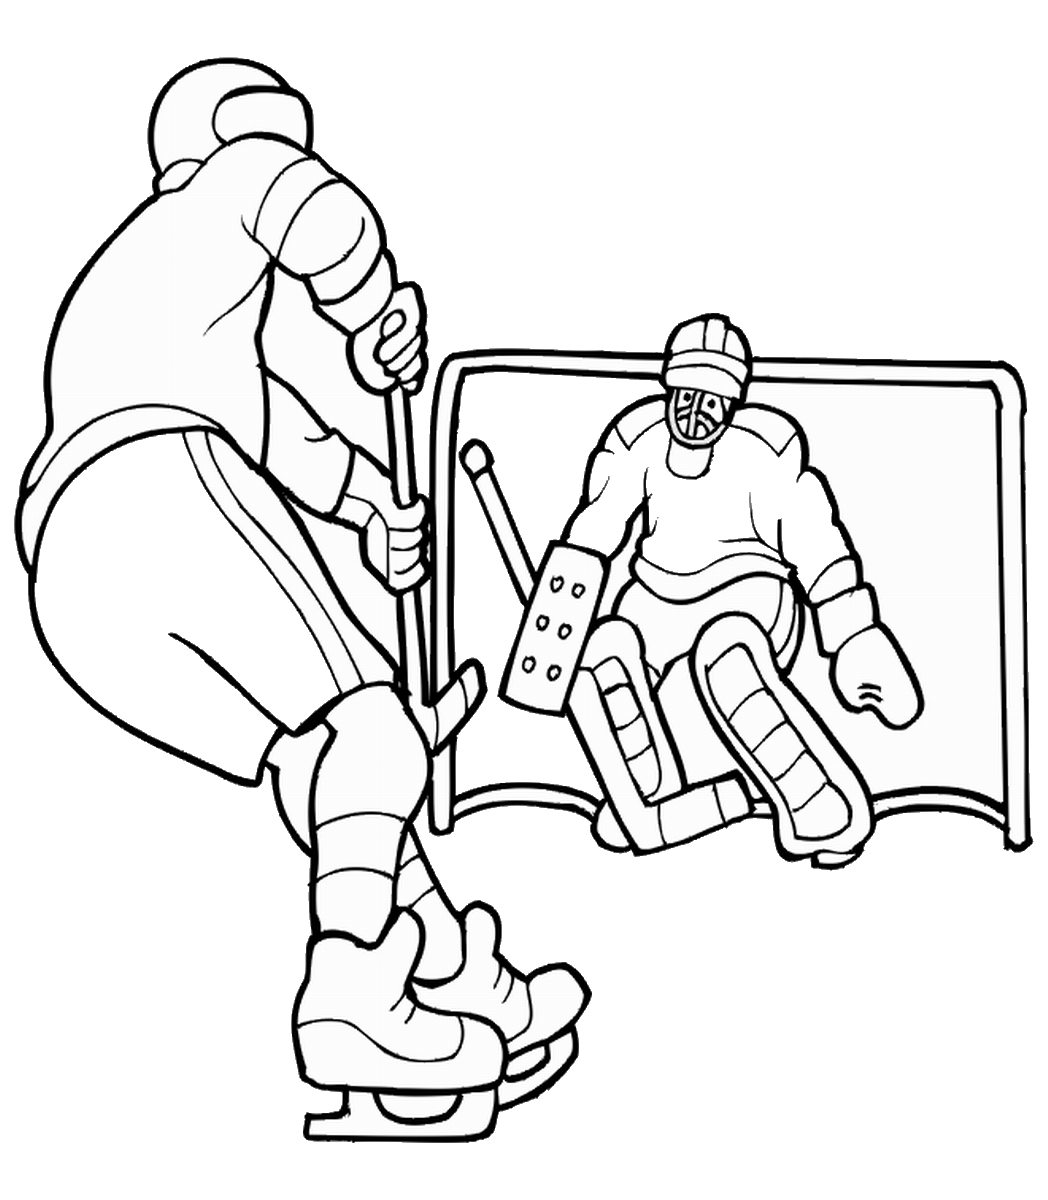 Hockey Coloring Pages hockey_coloring8 Printable 2021 3299 Coloring4free